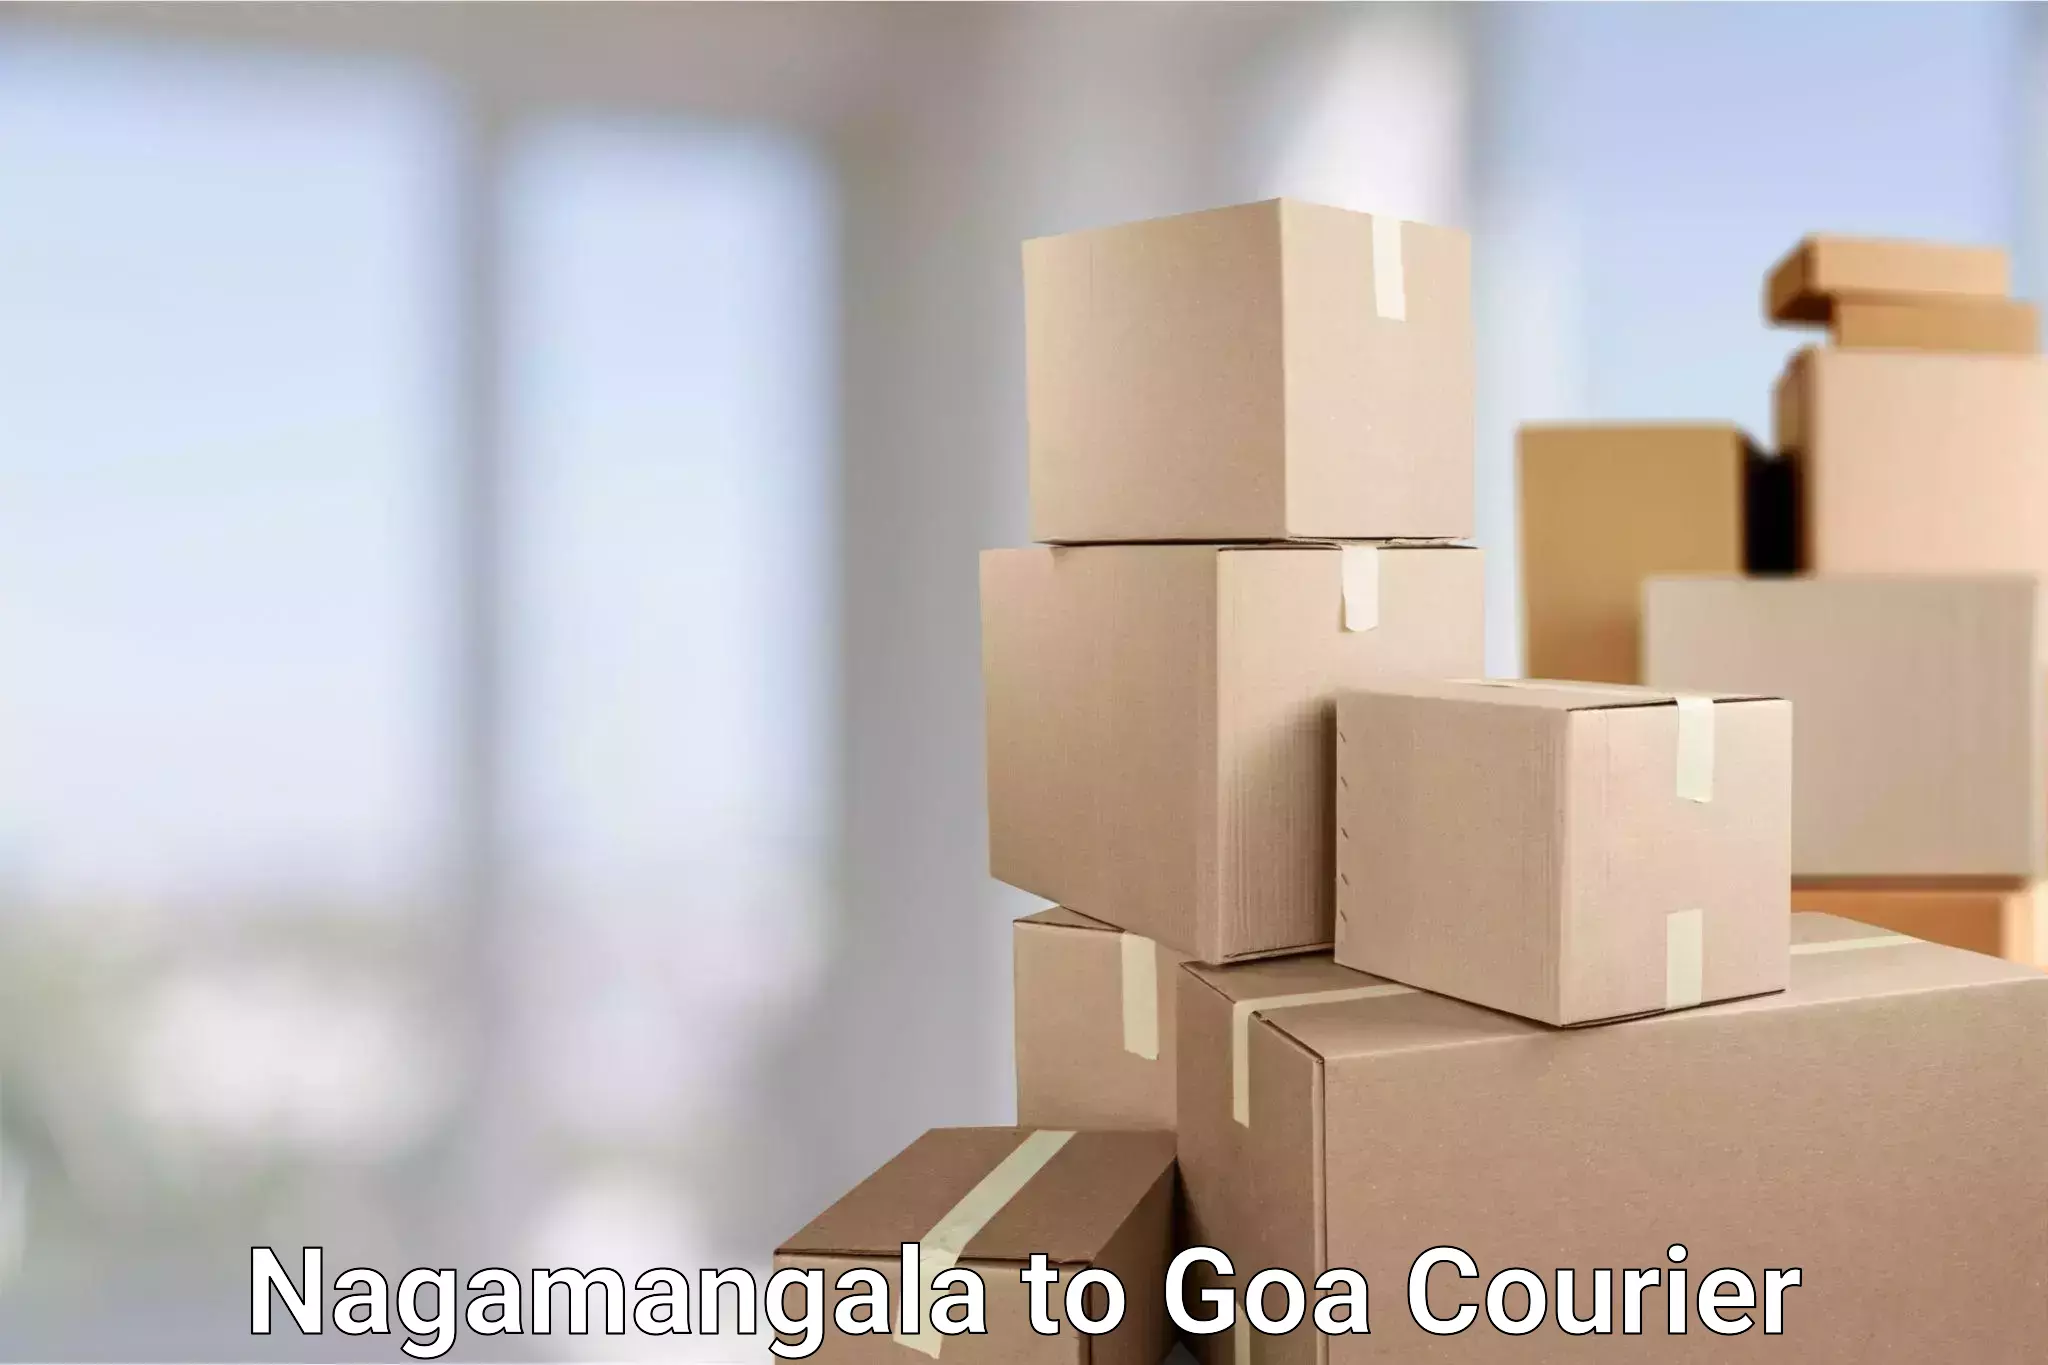 Courier service booking Nagamangala to Goa